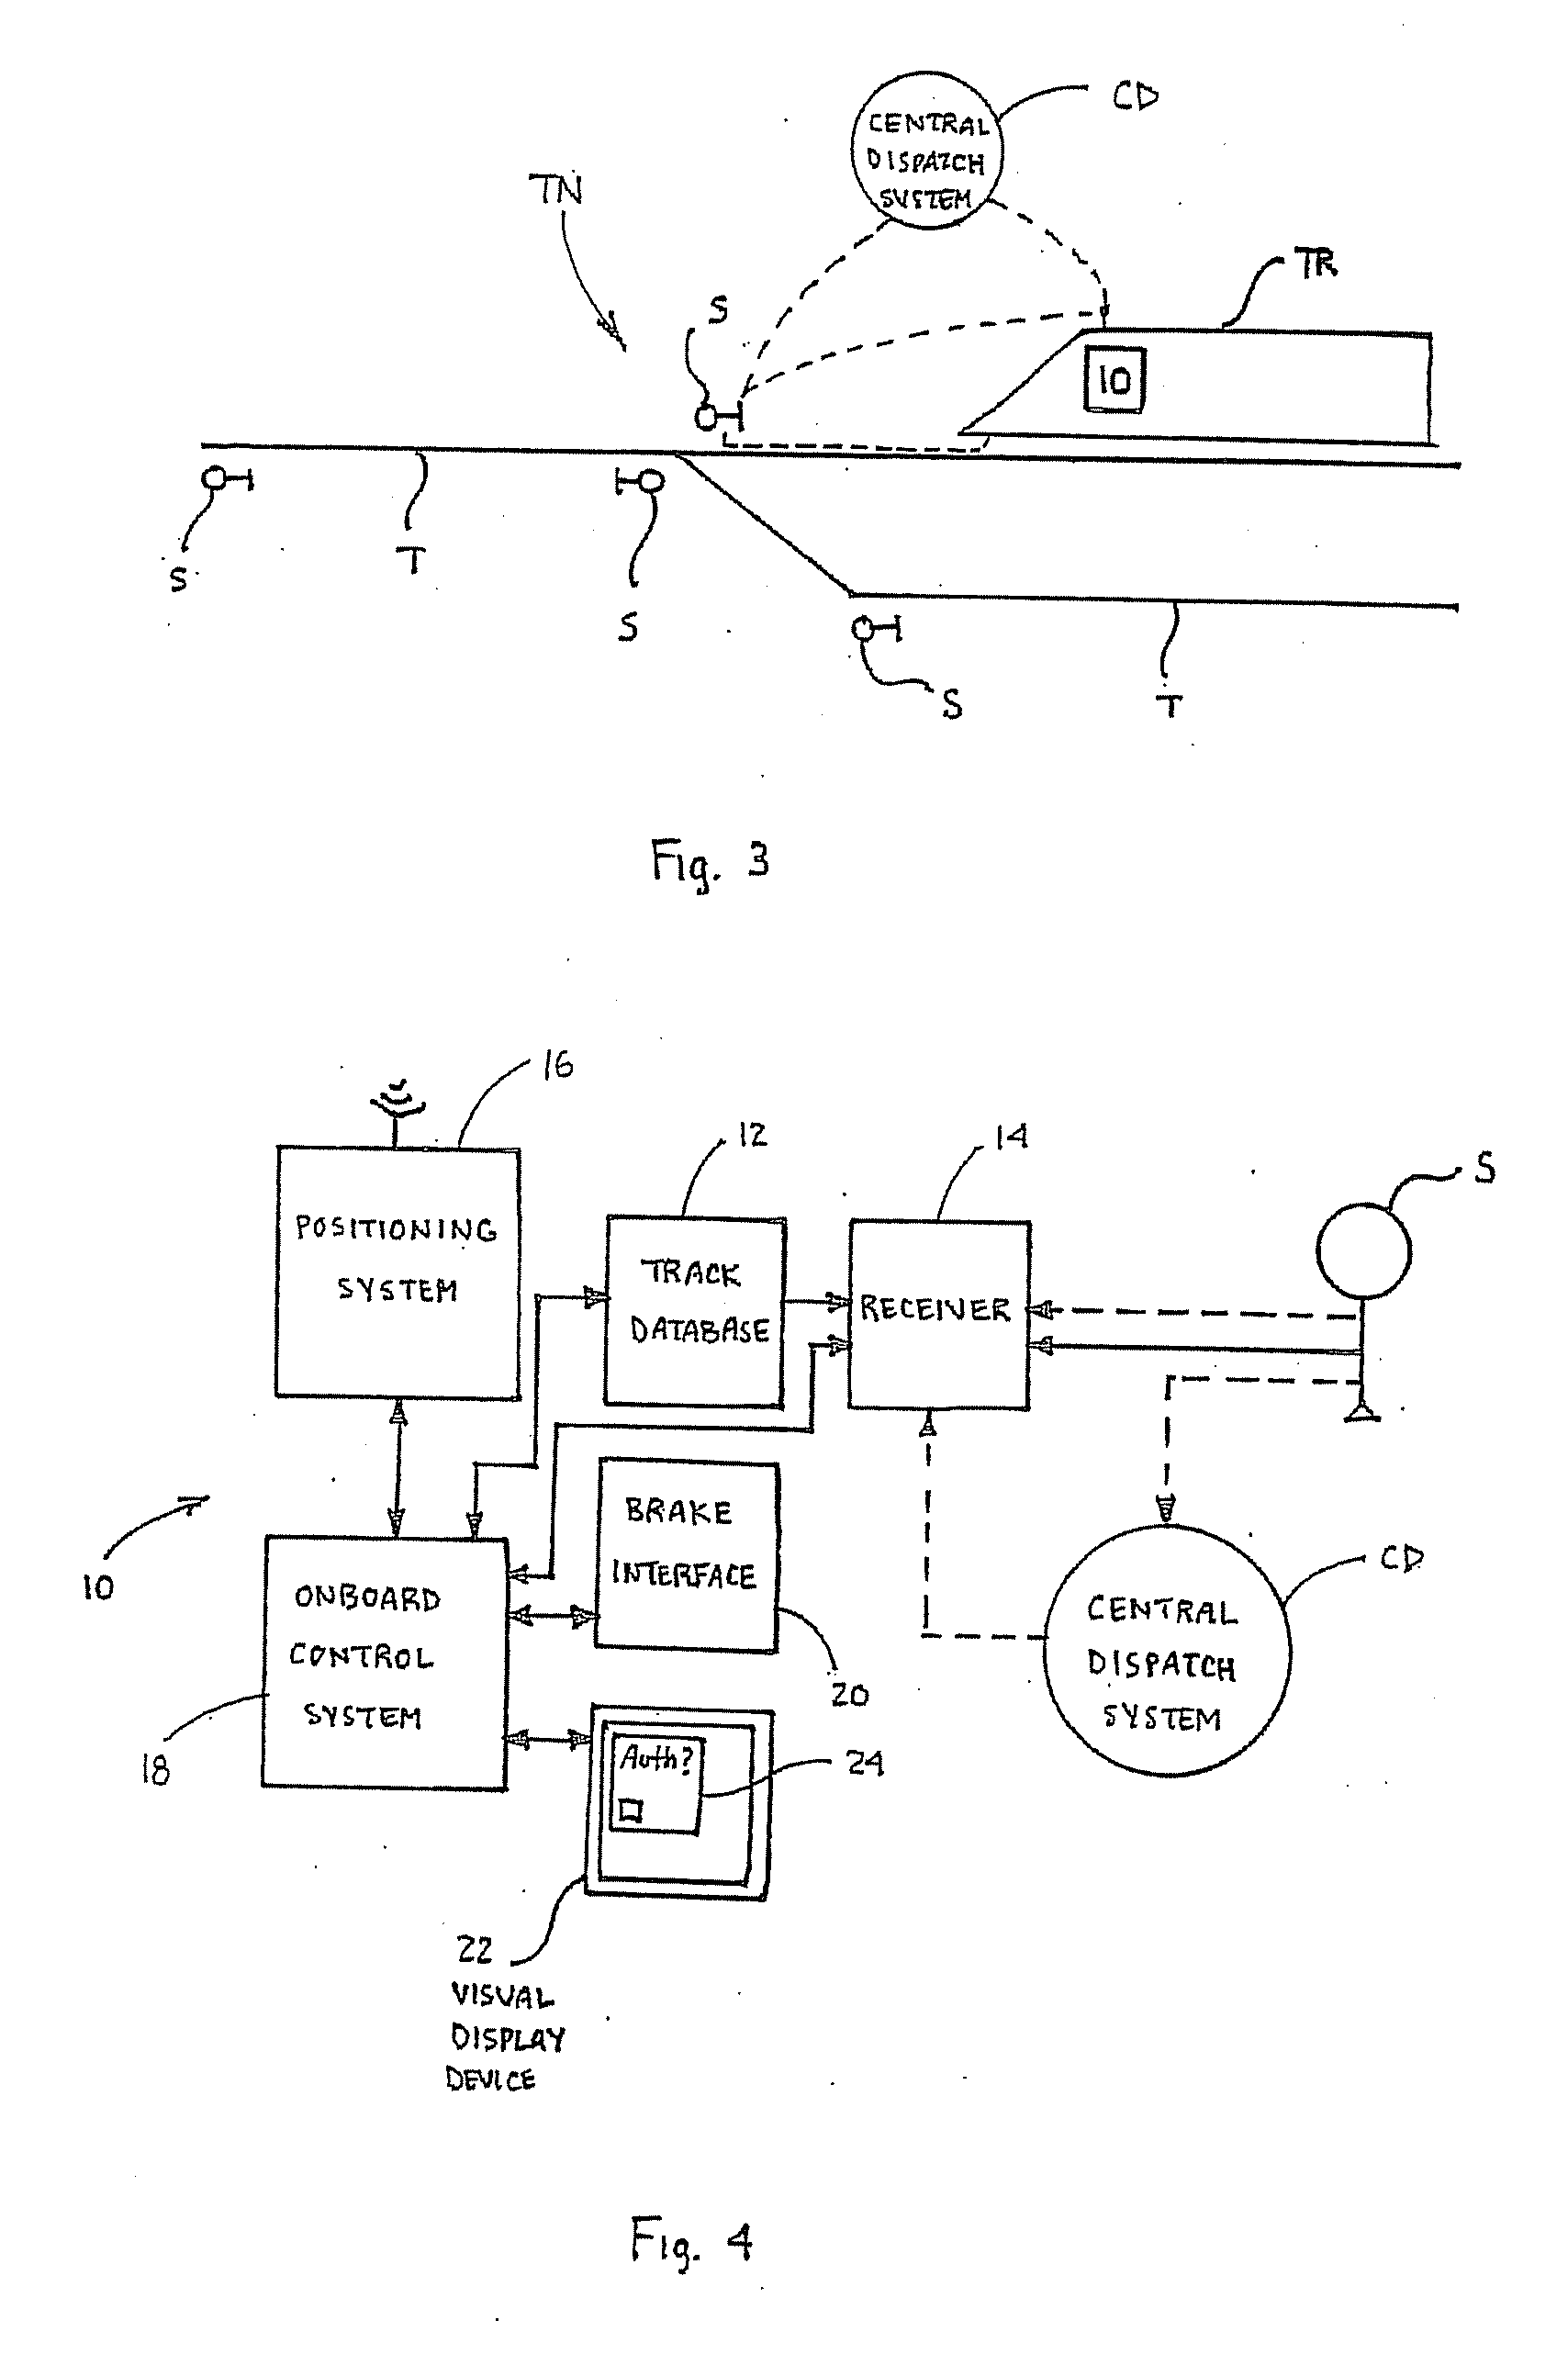 Train Control Method and System